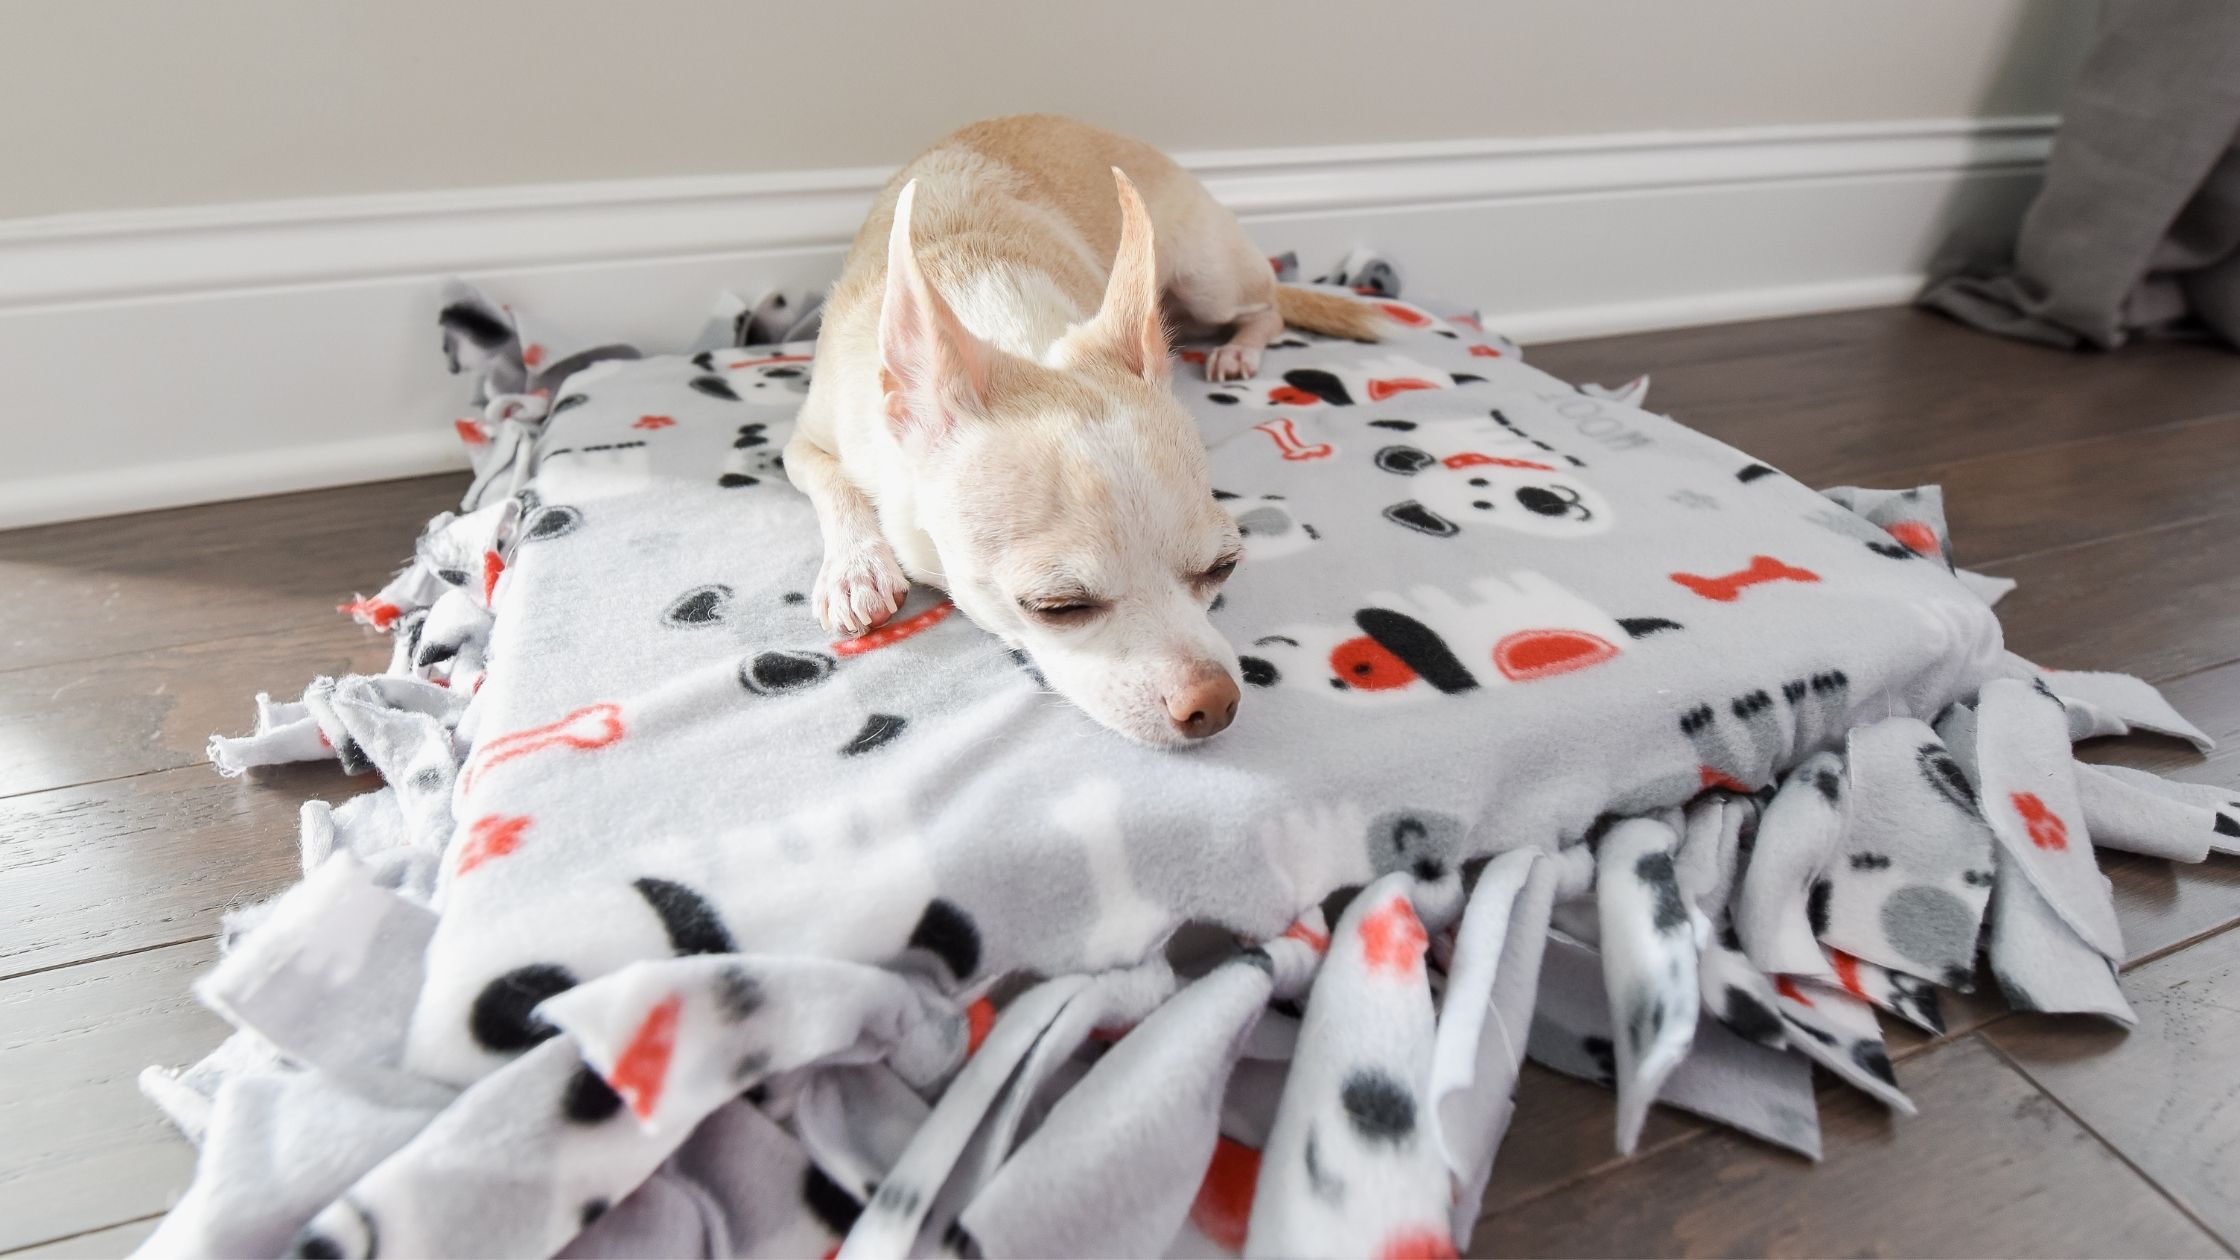 DIY No-Sew Dog Bed: An Easy, Cheap, and Fun Project for Your Pup